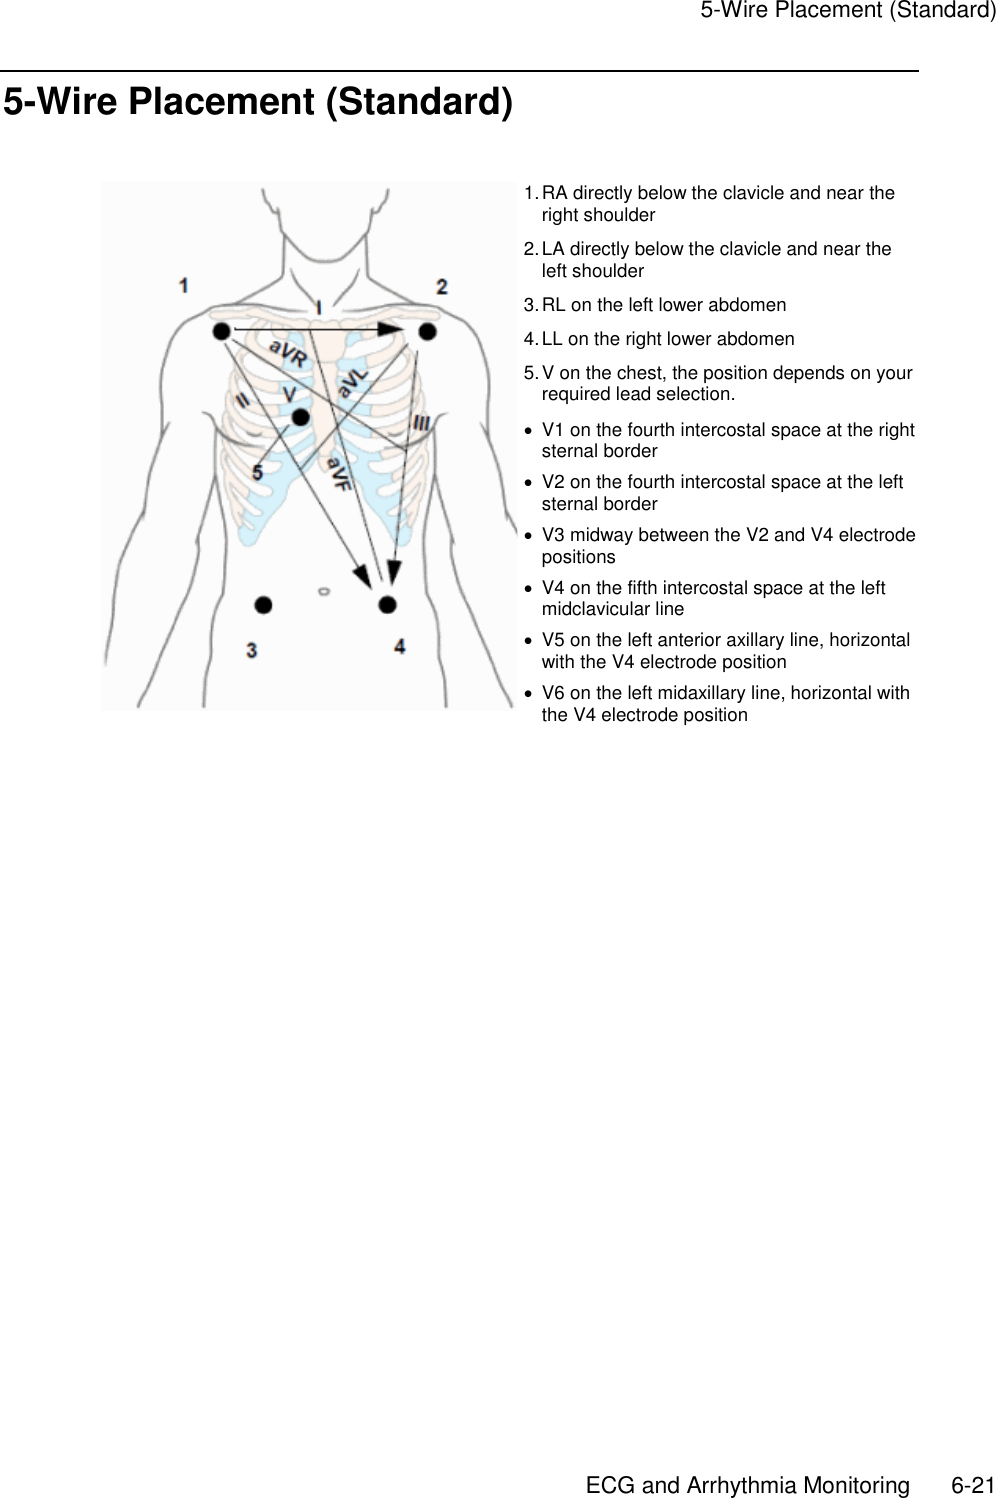     5-Wire Placement (Standard)       ECG and Arrhythmia Monitoring        6-21 5-Wire Placement (Standard)   1. RA directly below the clavicle and near the right shoulder 2. LA directly below the clavicle and near the left shoulder 3. RL on the left lower abdomen 4. LL on the right lower abdomen 5. V on the chest, the position depends on your required lead selection.   V1 on the fourth intercostal space at the right sternal border   V2 on the fourth intercostal space at the left sternal border   V3 midway between the V2 and V4 electrode positions   V4 on the fifth intercostal space at the left midclavicular line   V5 on the left anterior axillary line, horizontal with the V4 electrode position   V6 on the left midaxillary line, horizontal with the V4 electrode position   